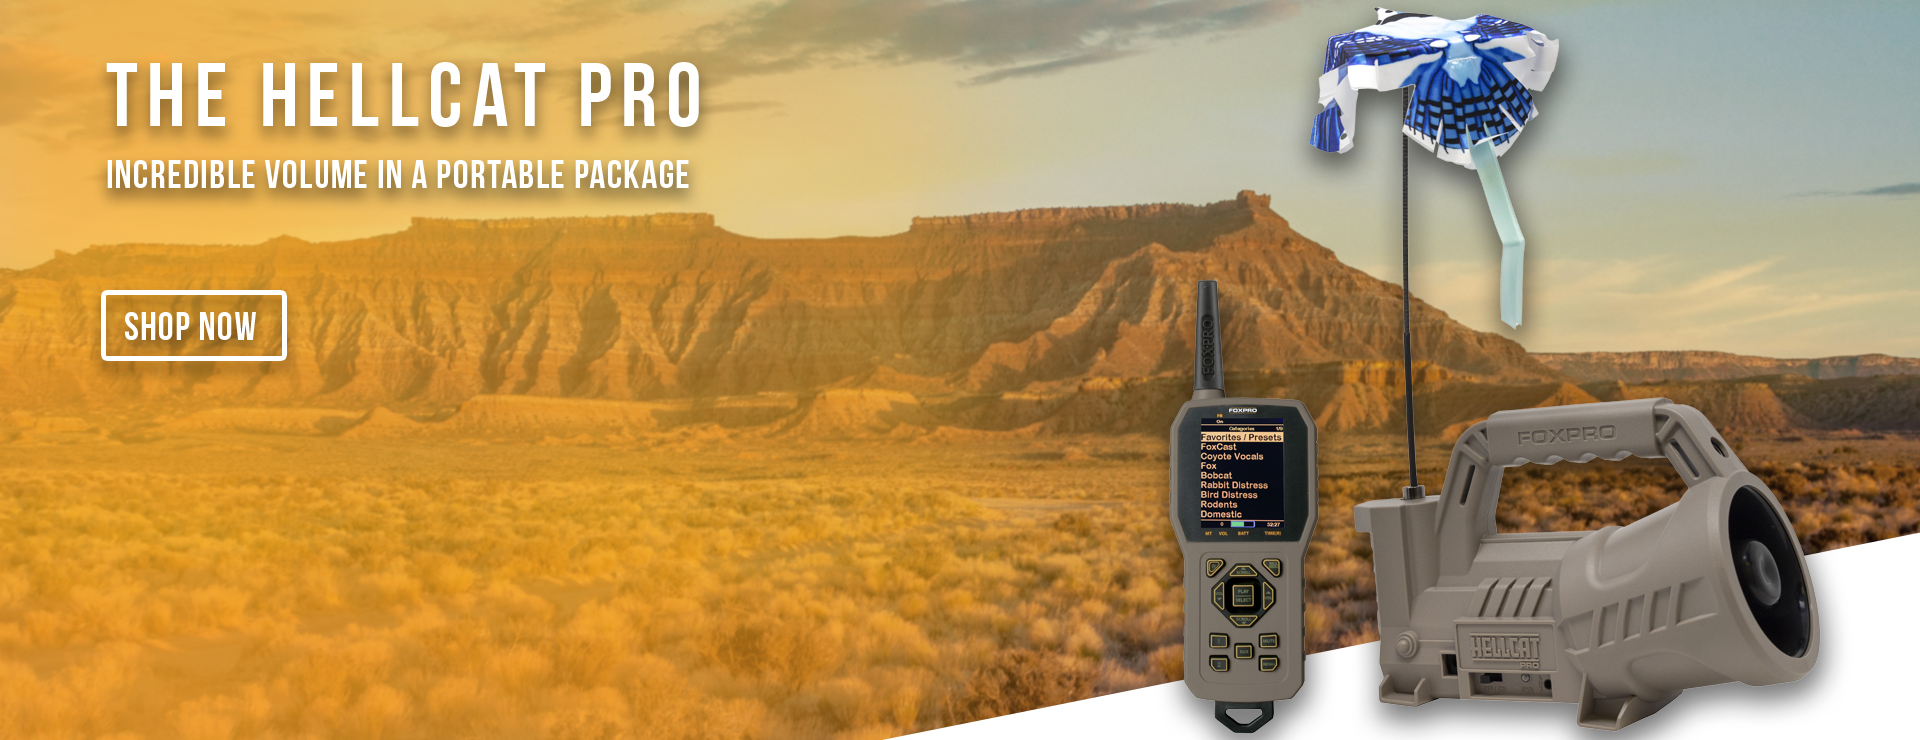 FOXPRO HellCat Pro Digital Game Call and TX1000 remote control.